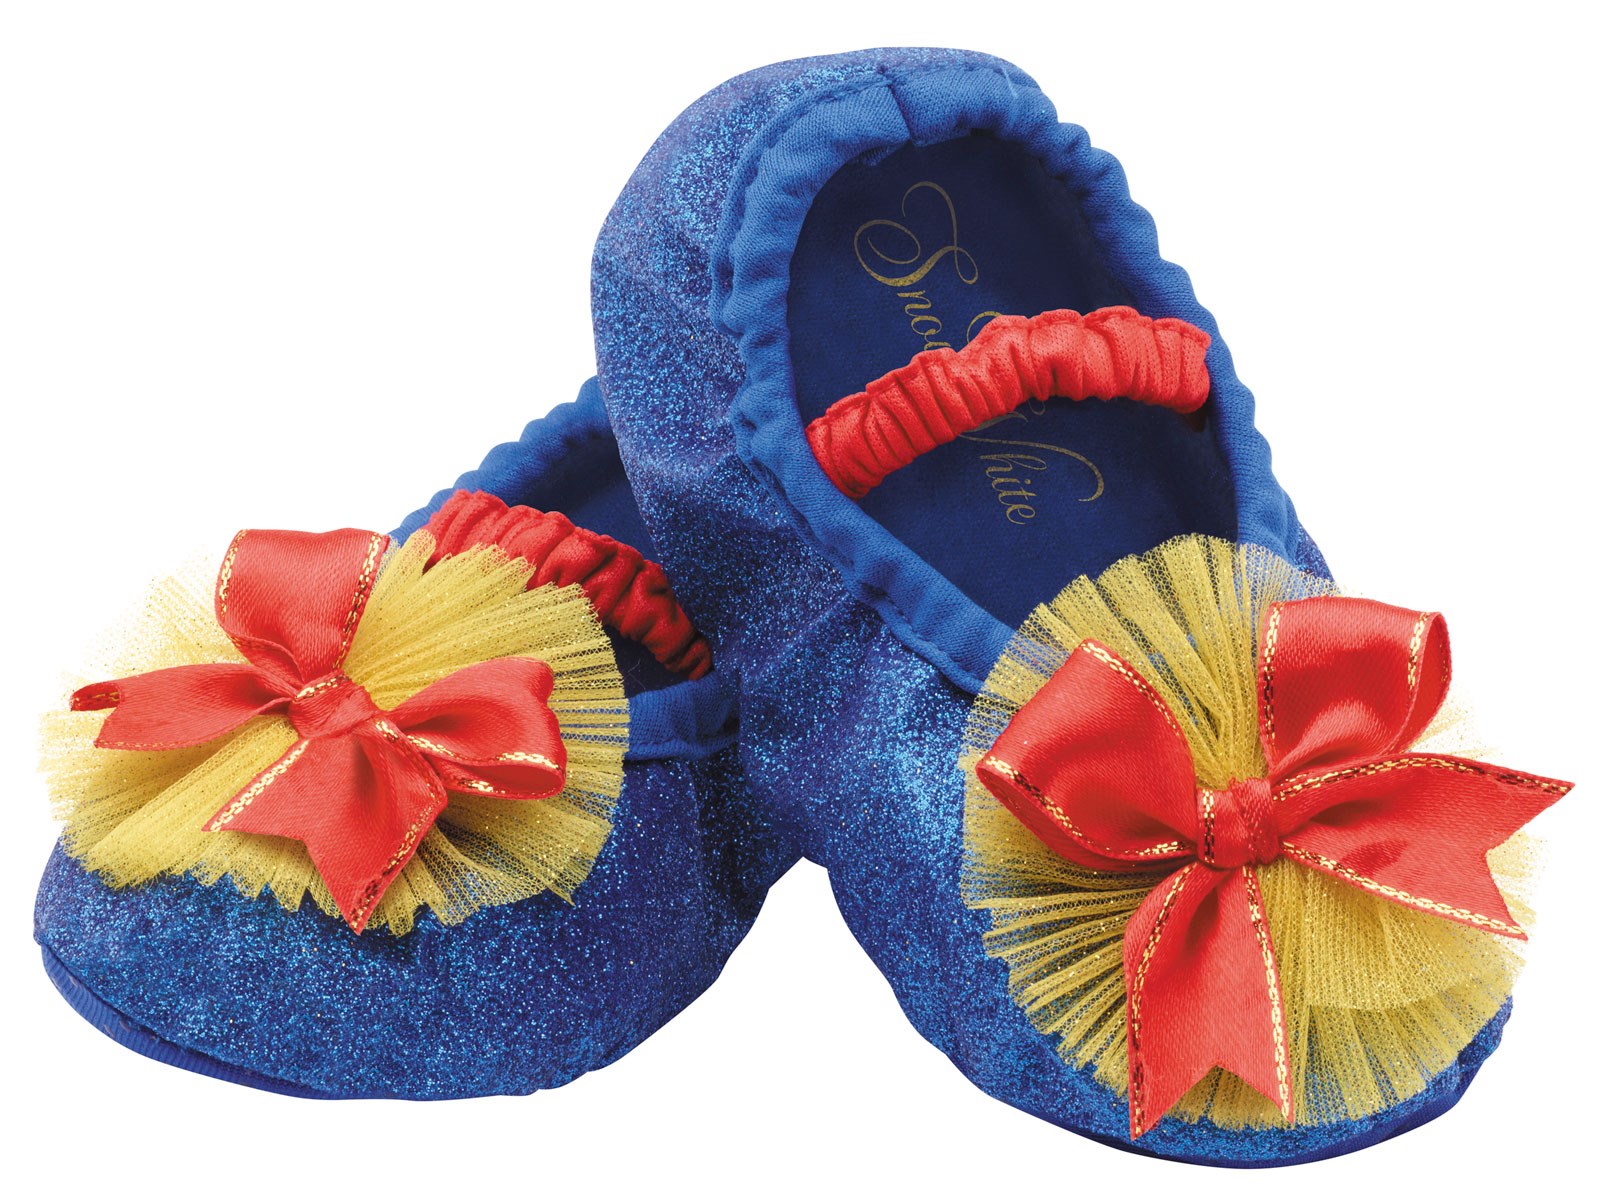 Disney Princess Snow White Slippers For Toddlers